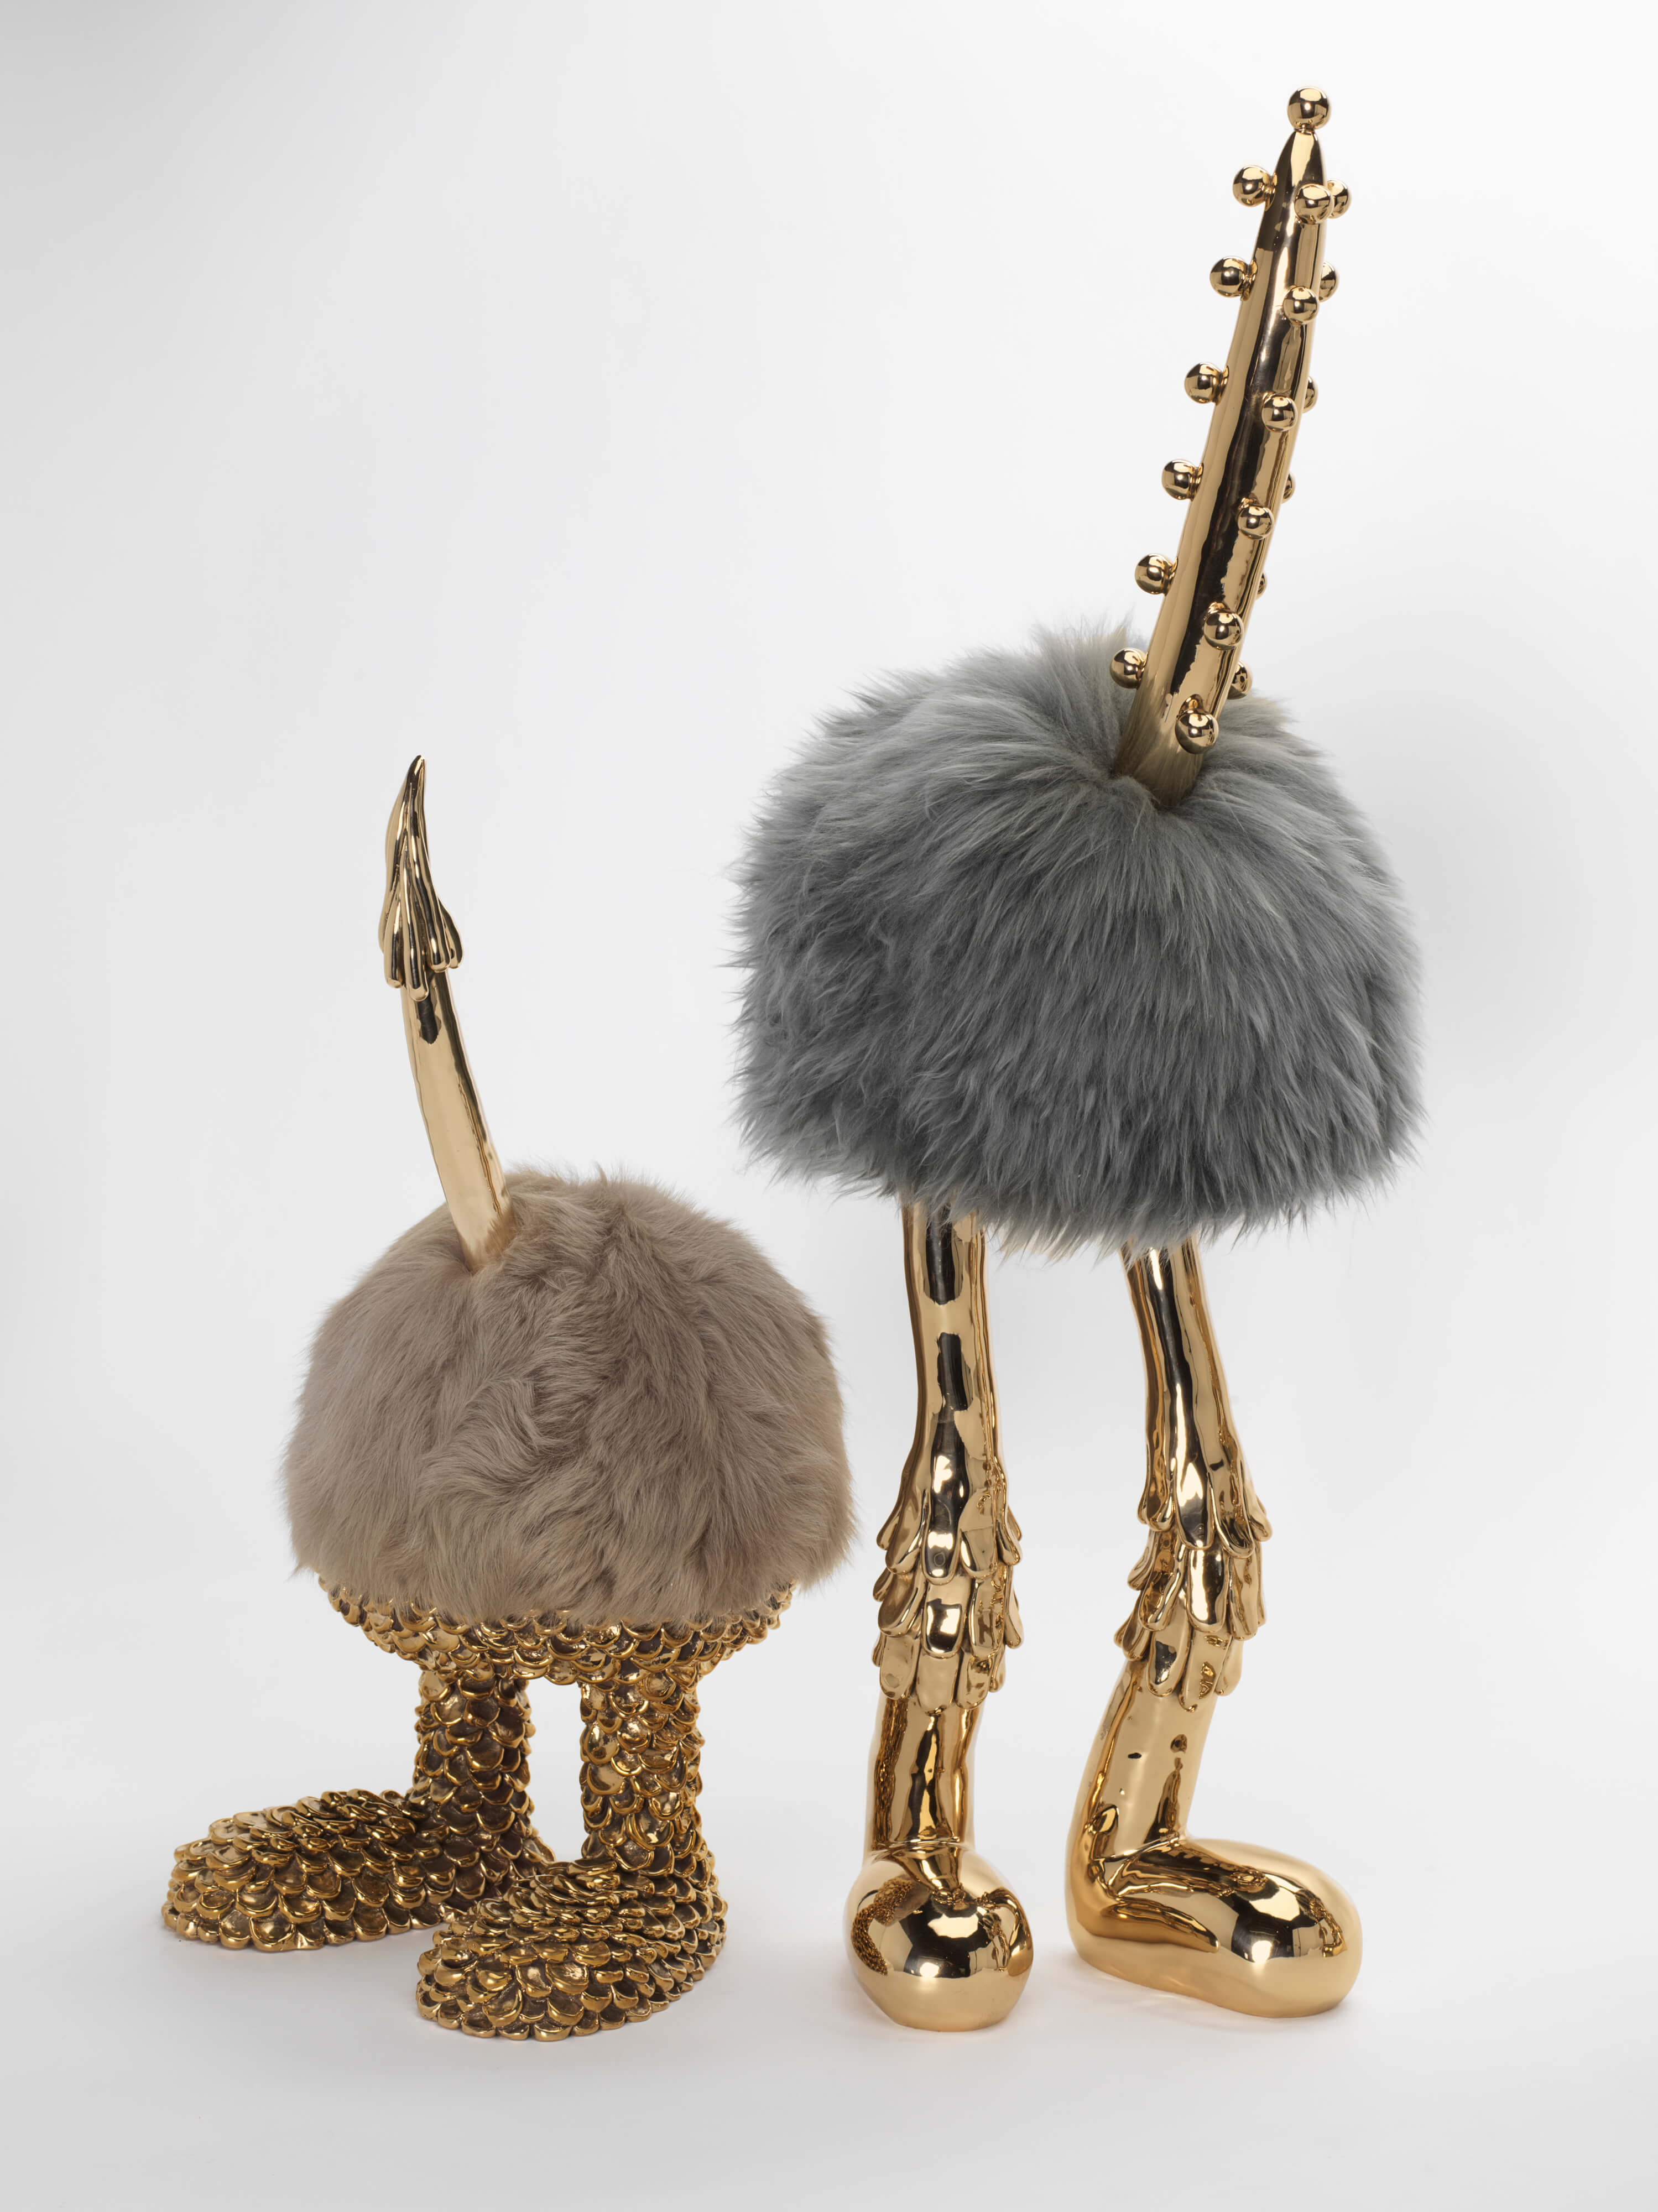 art installation of birds with fur body and bronze limbs